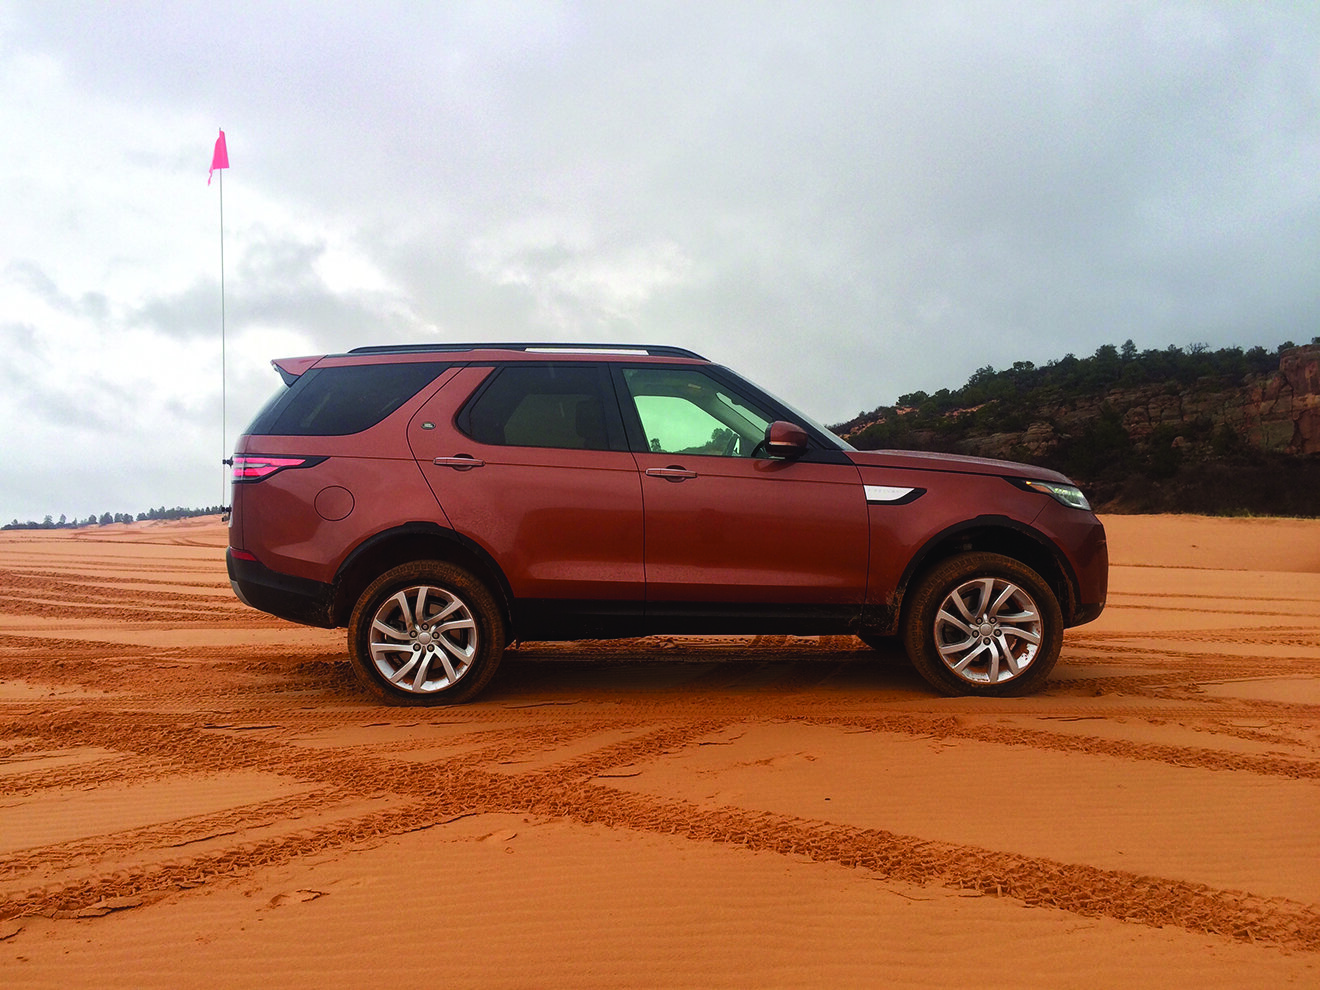 Taking a break with the Td6 version of the Land Rover Discovery at Coral Pink Sand Dunes State Park.jpg